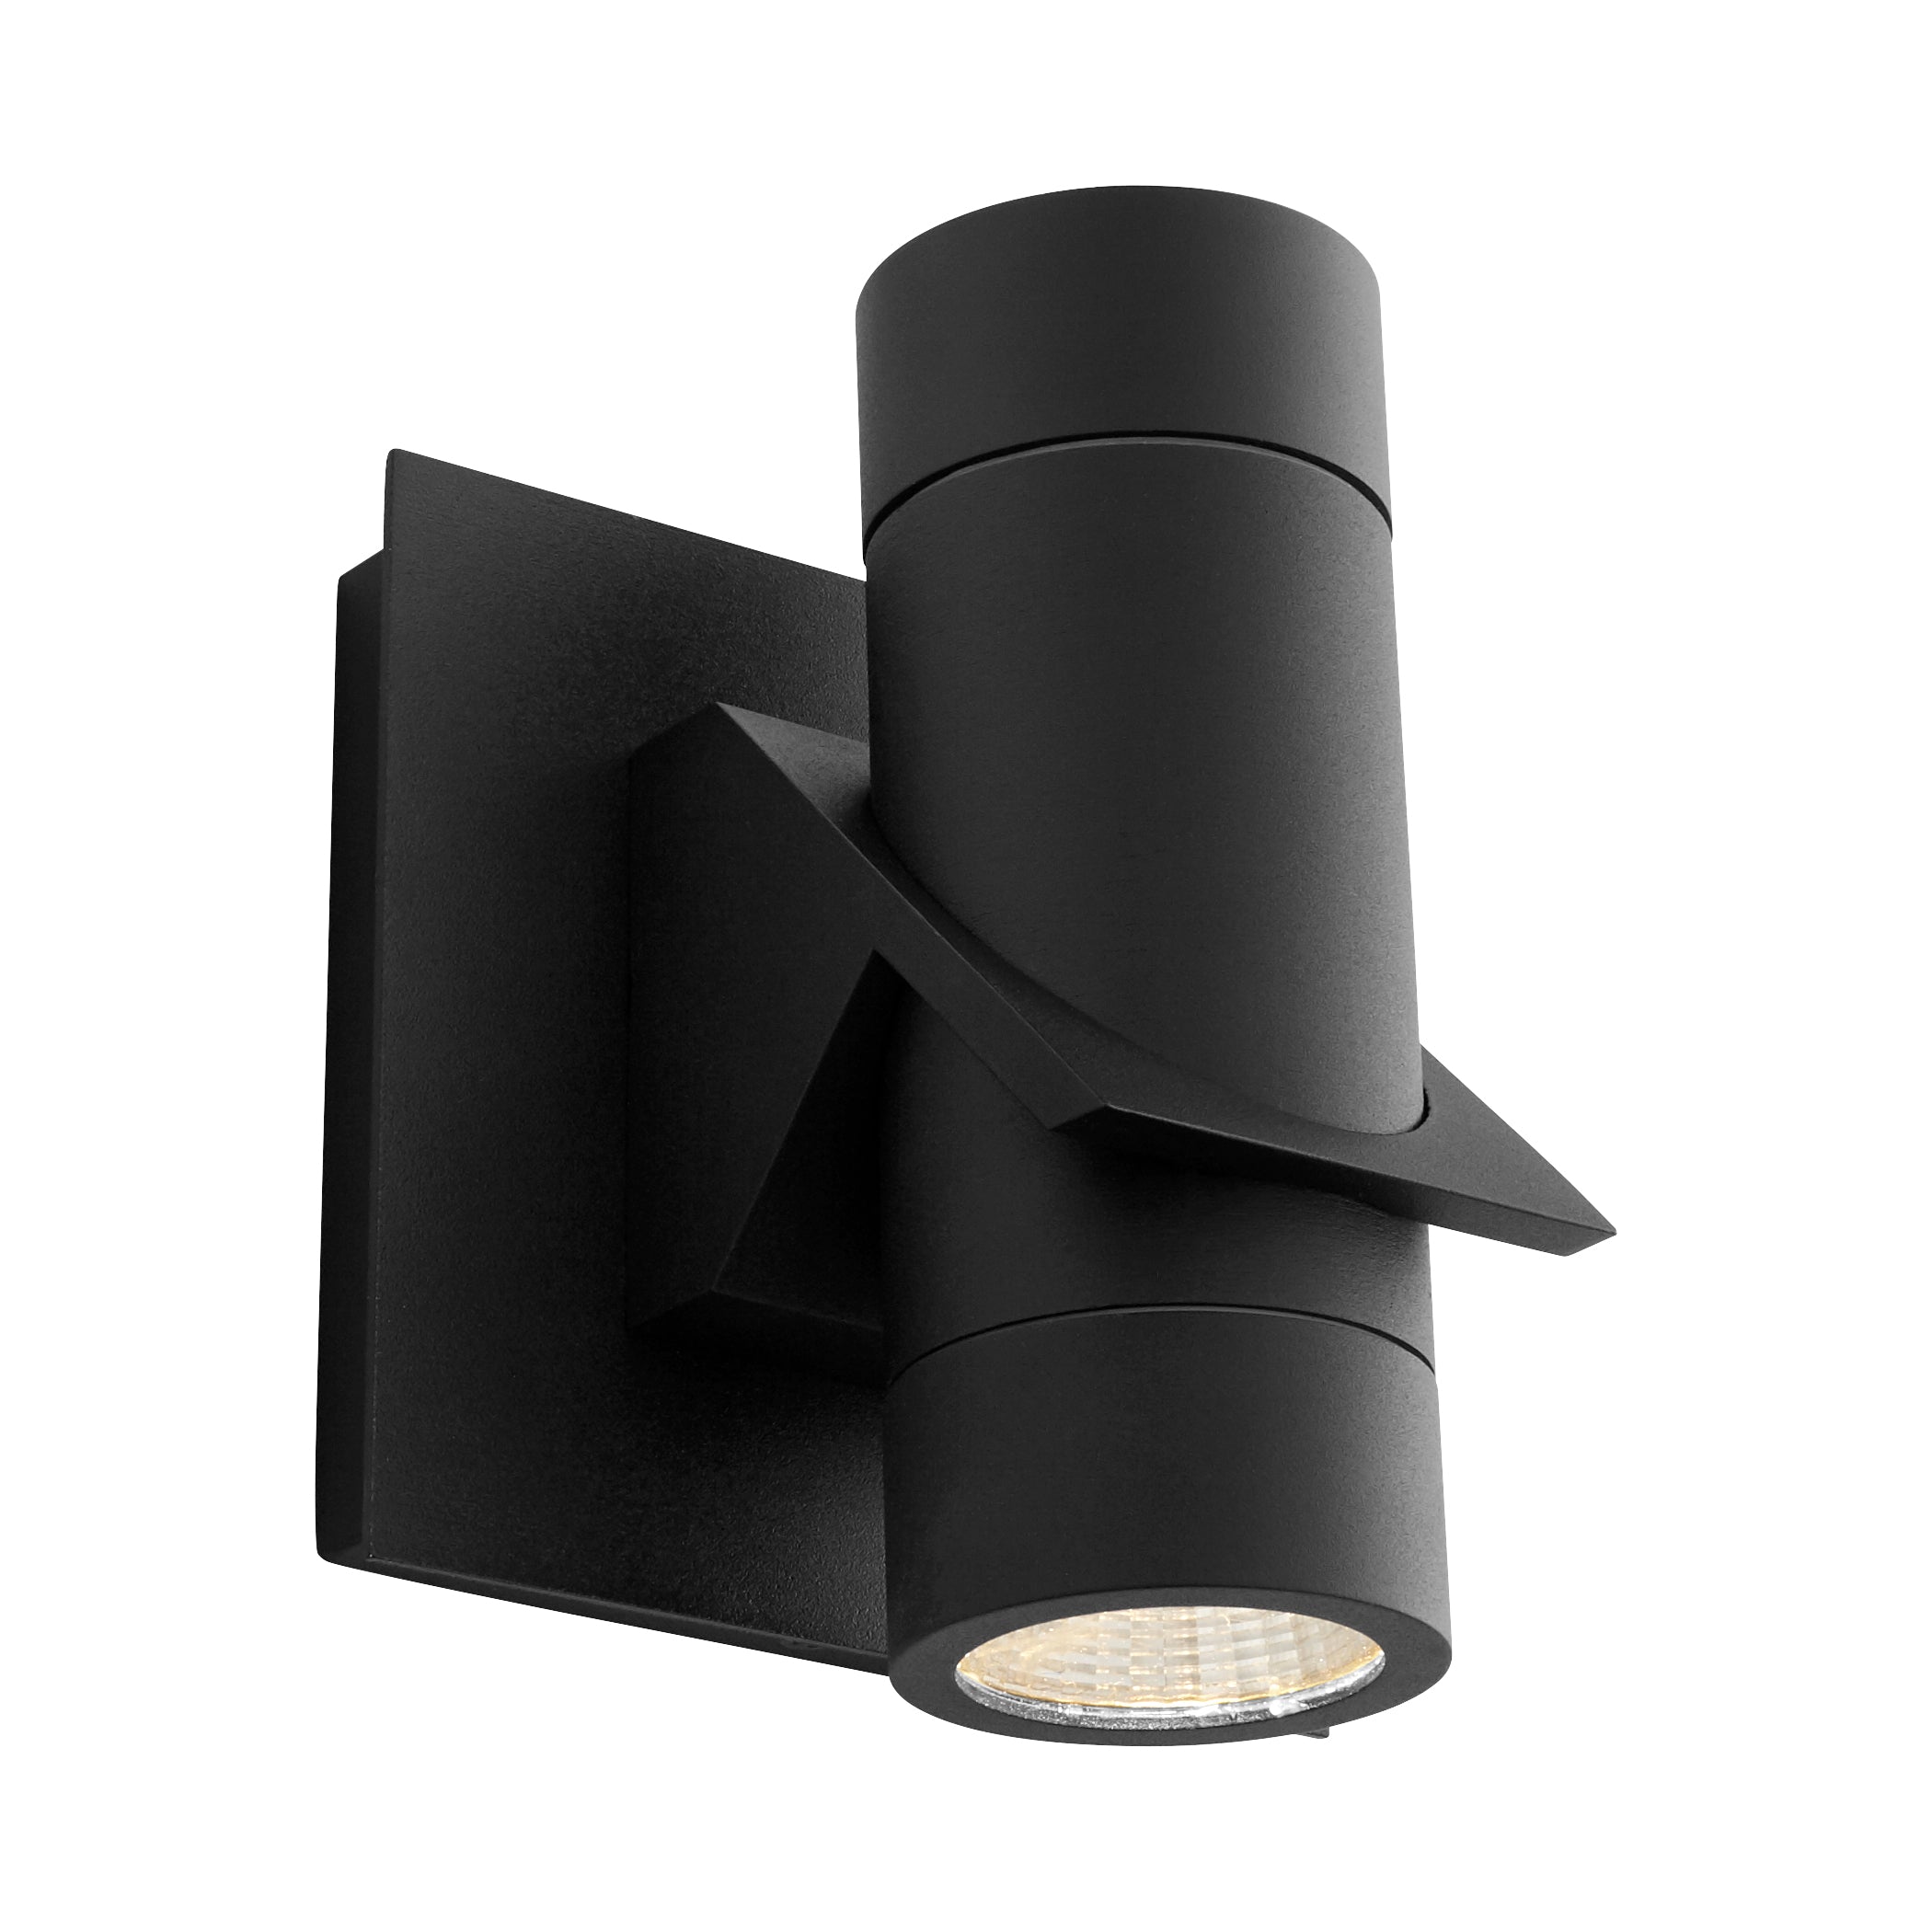 Oxygen Razzo 3-746-15 Outdoor Cylinder Wall Sconce Light - Black